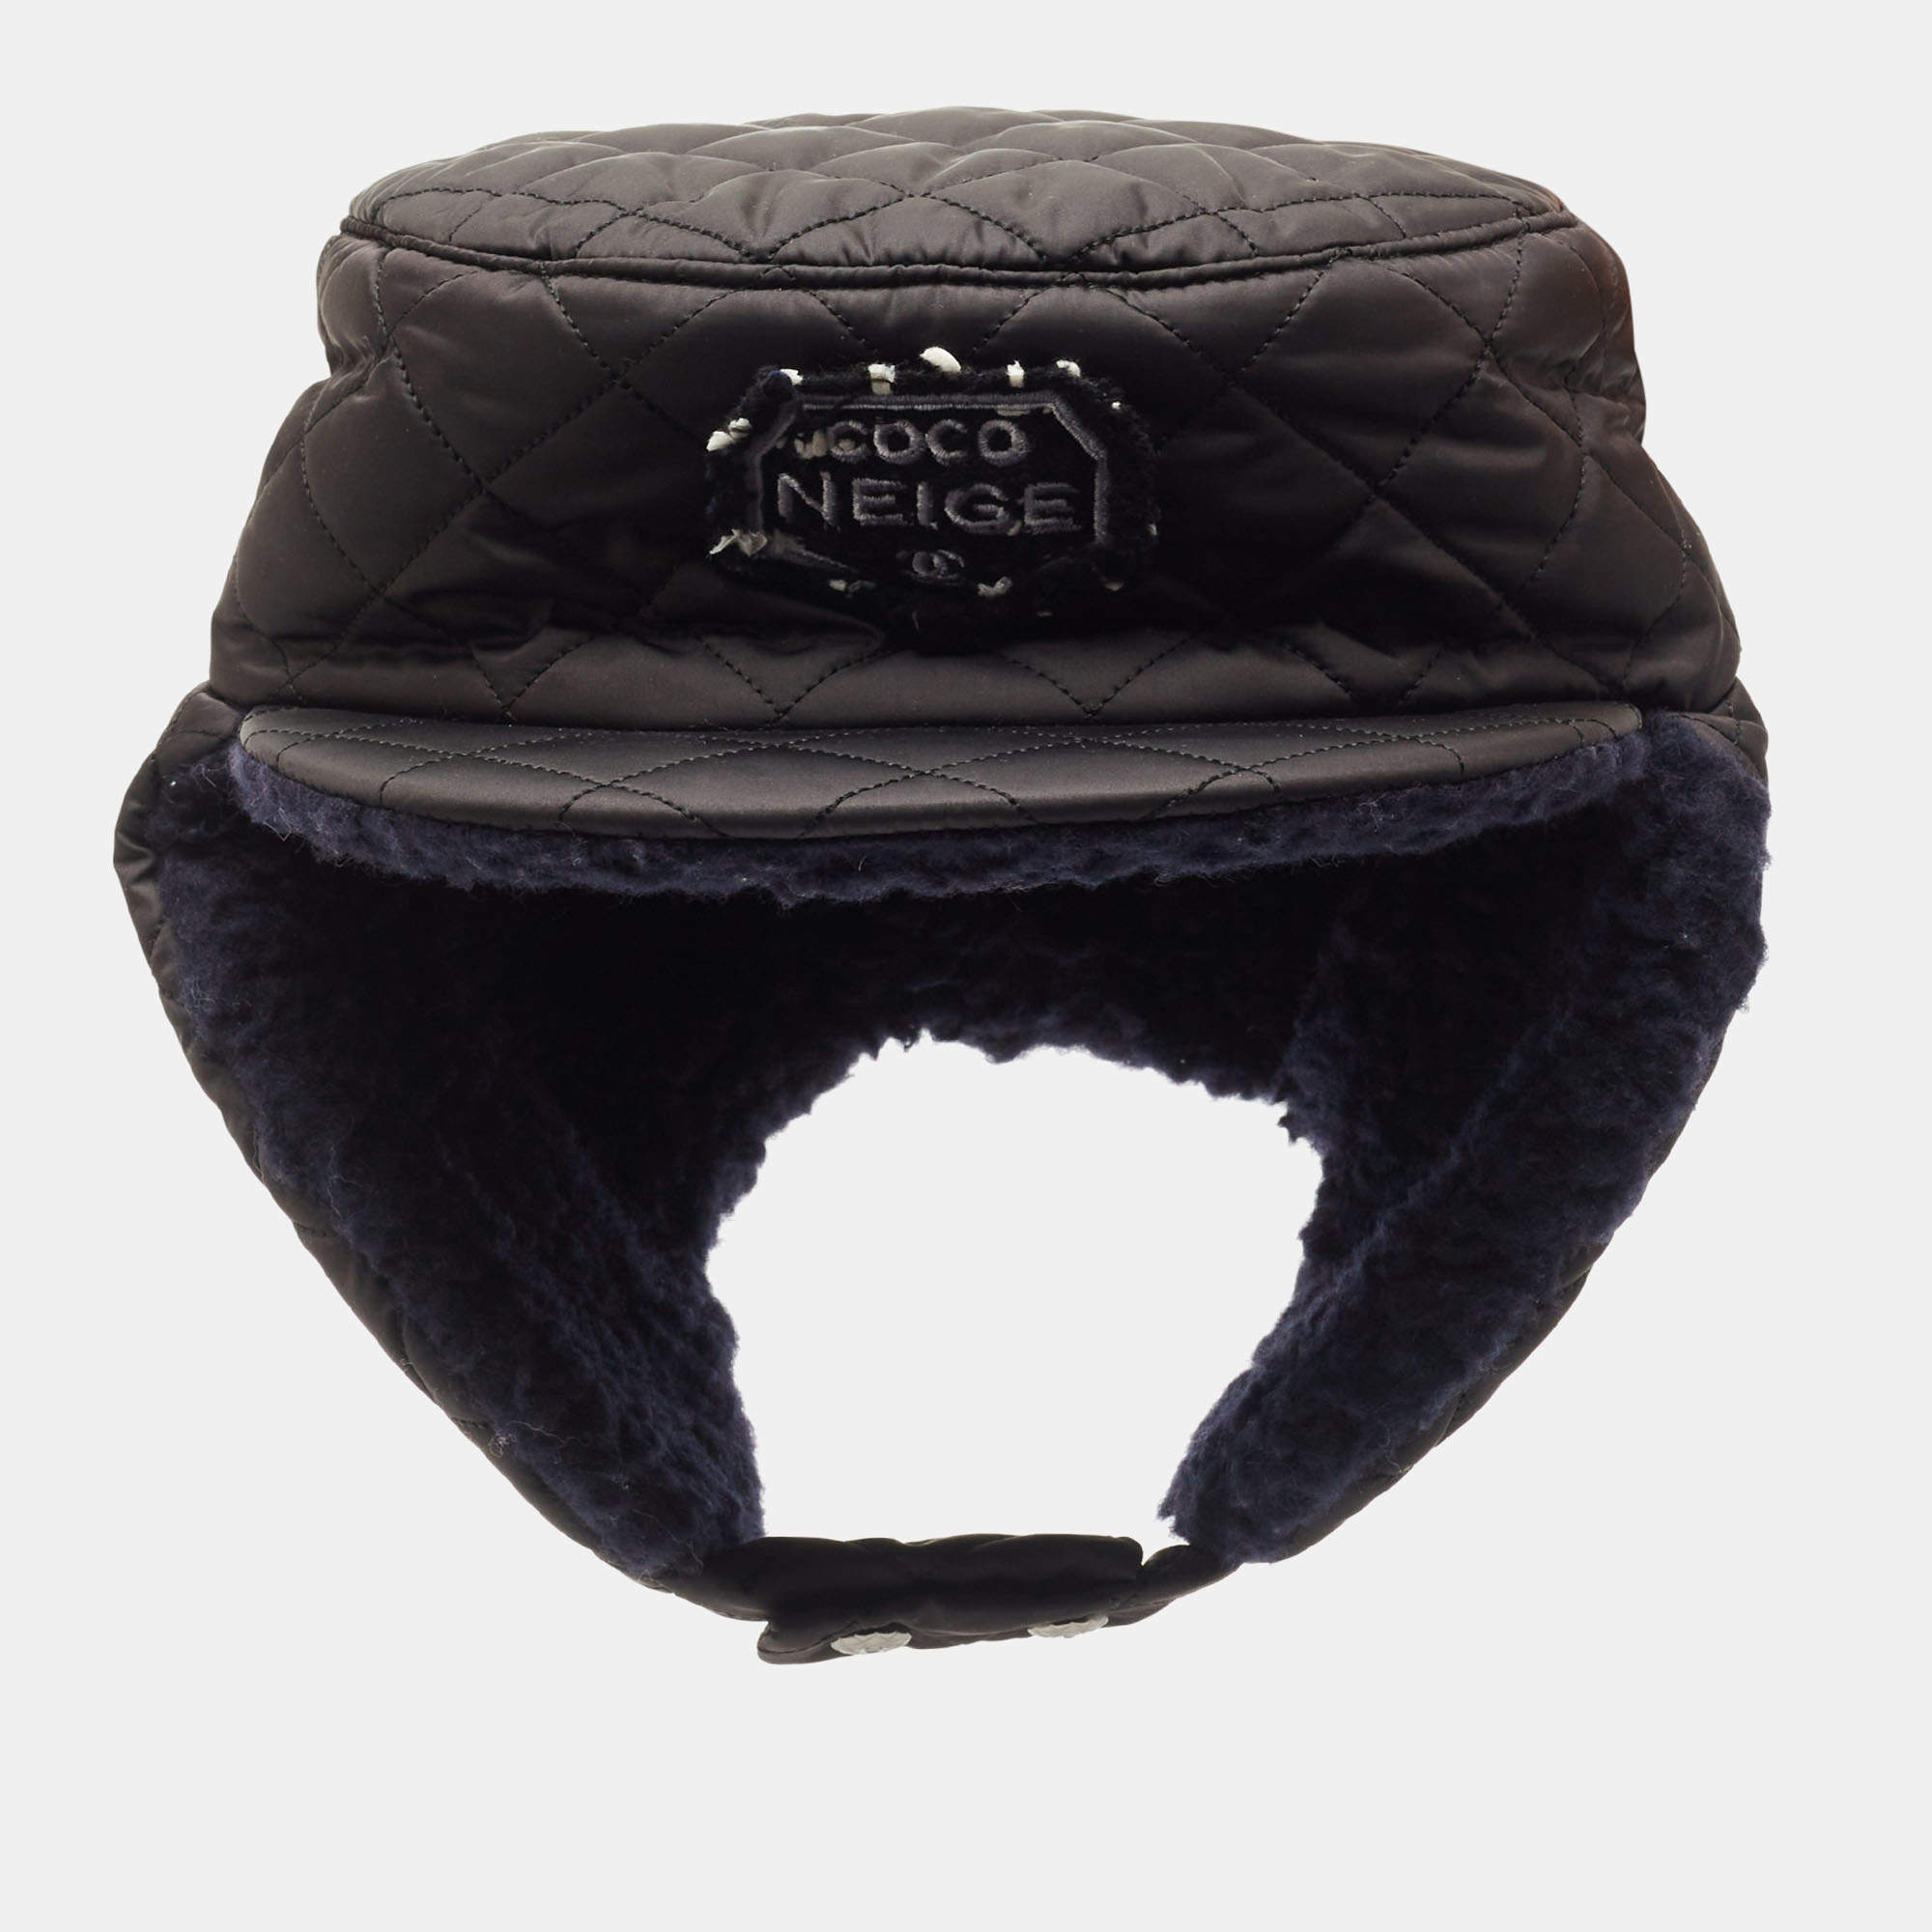 Chanel Black Quilted Coco Neige Trapper Hat M Chanel